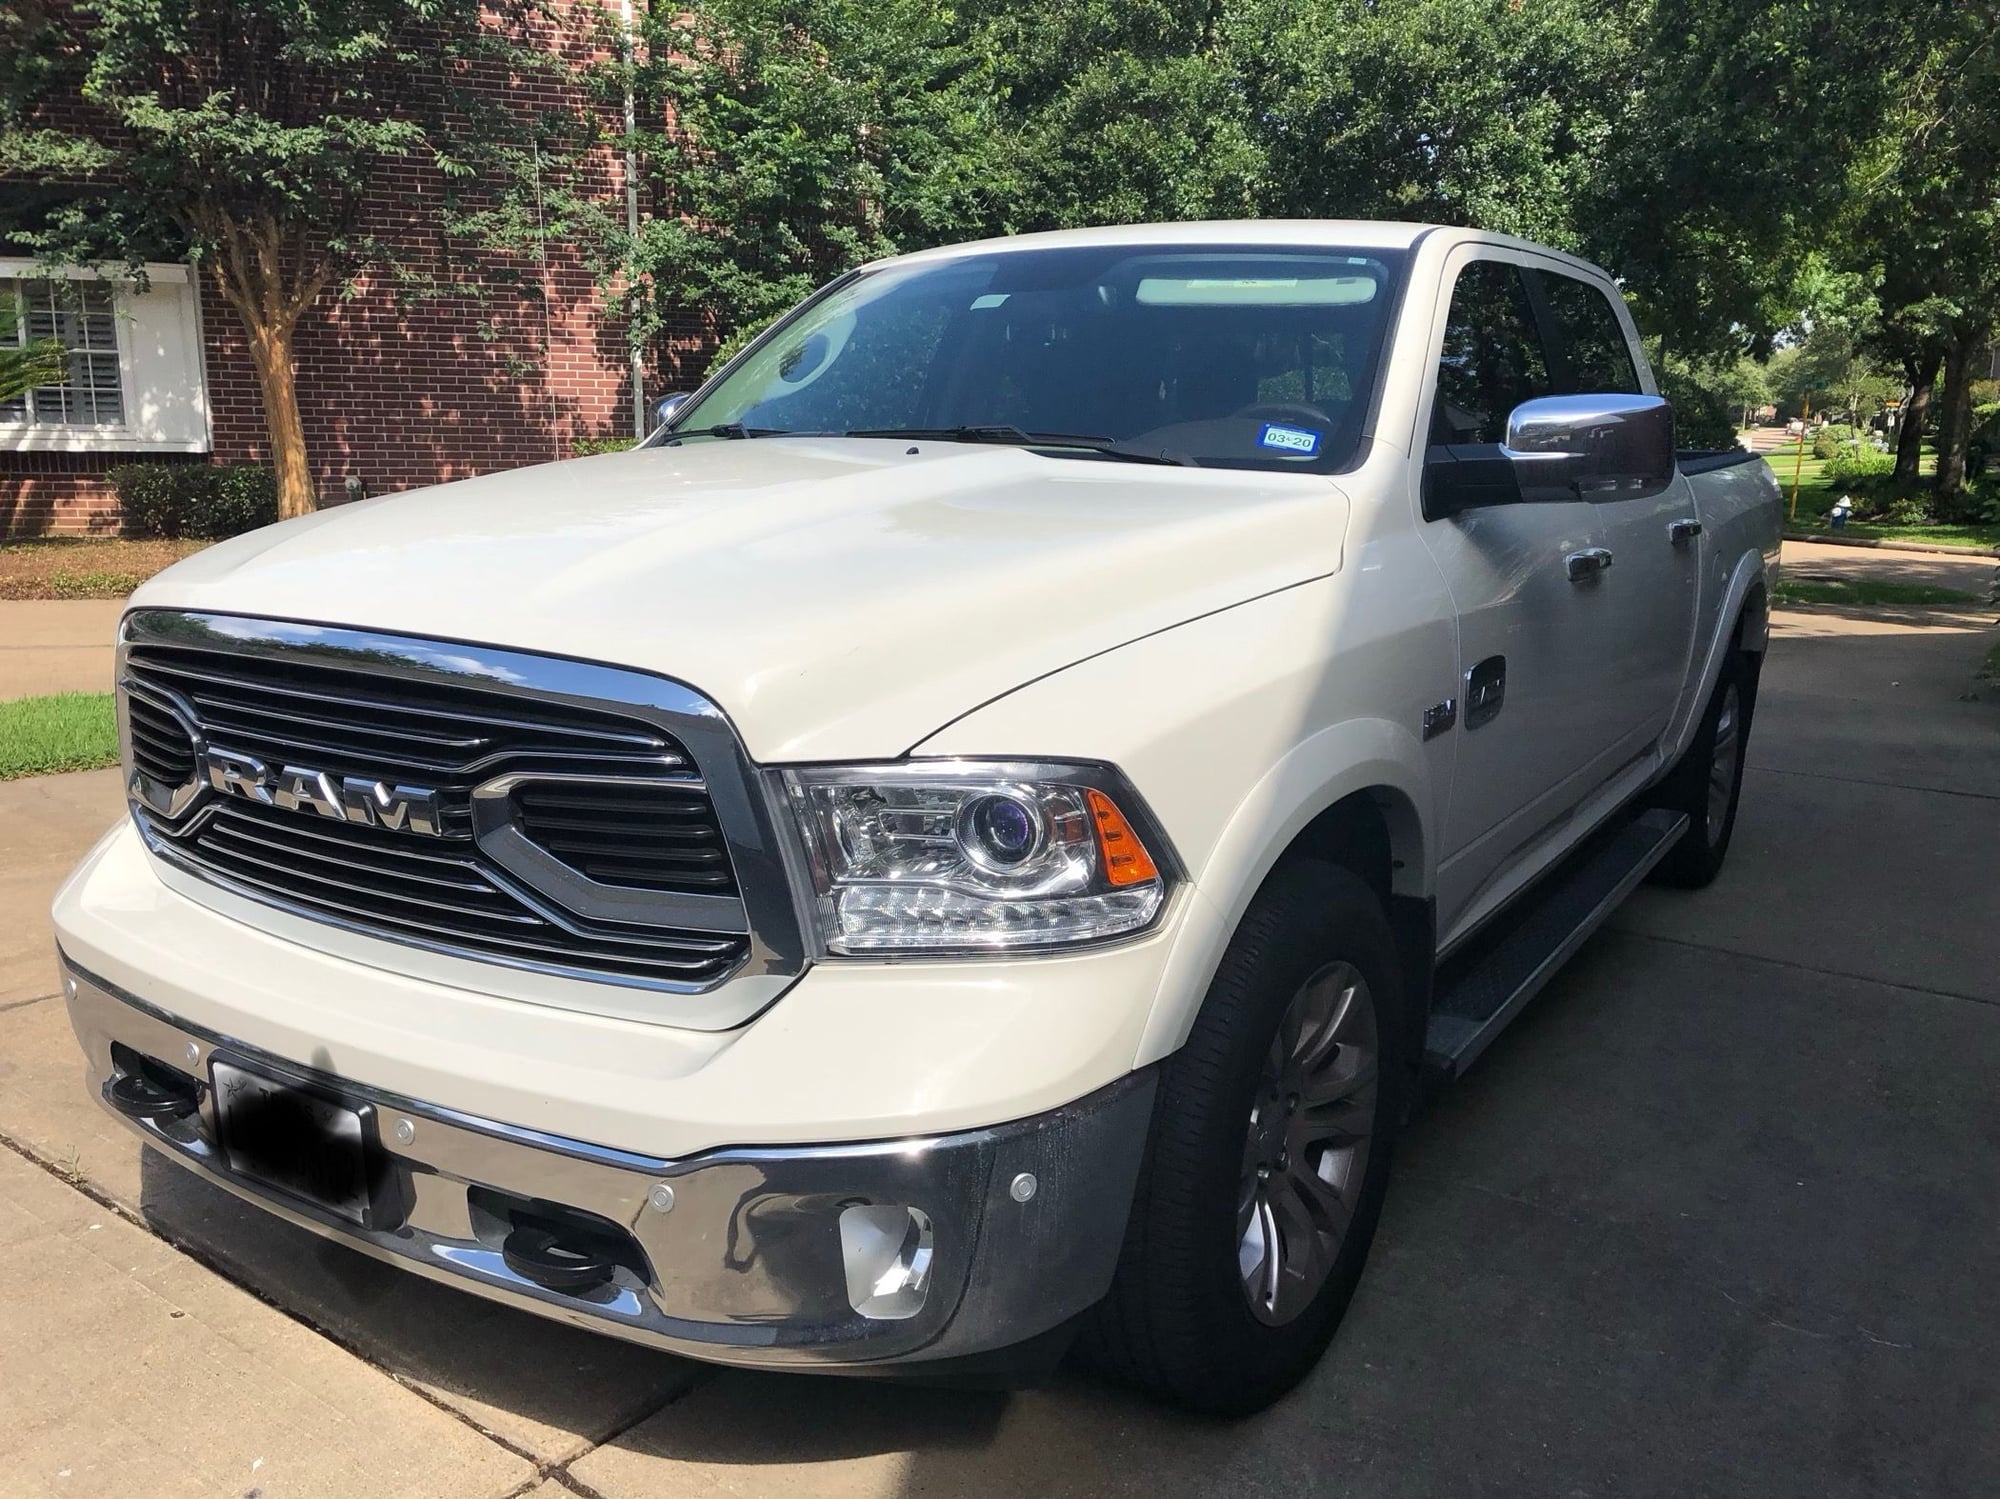 2017 Ram 1500 - 2017 Ram 1500 Longhorn 4x4, 28k miles - Used - VIN 1C6RR7PTXHS750888 - 28,000 Miles - 8 cyl - 4WD - Automatic - Truck - White - Houston, TX 77094, United States